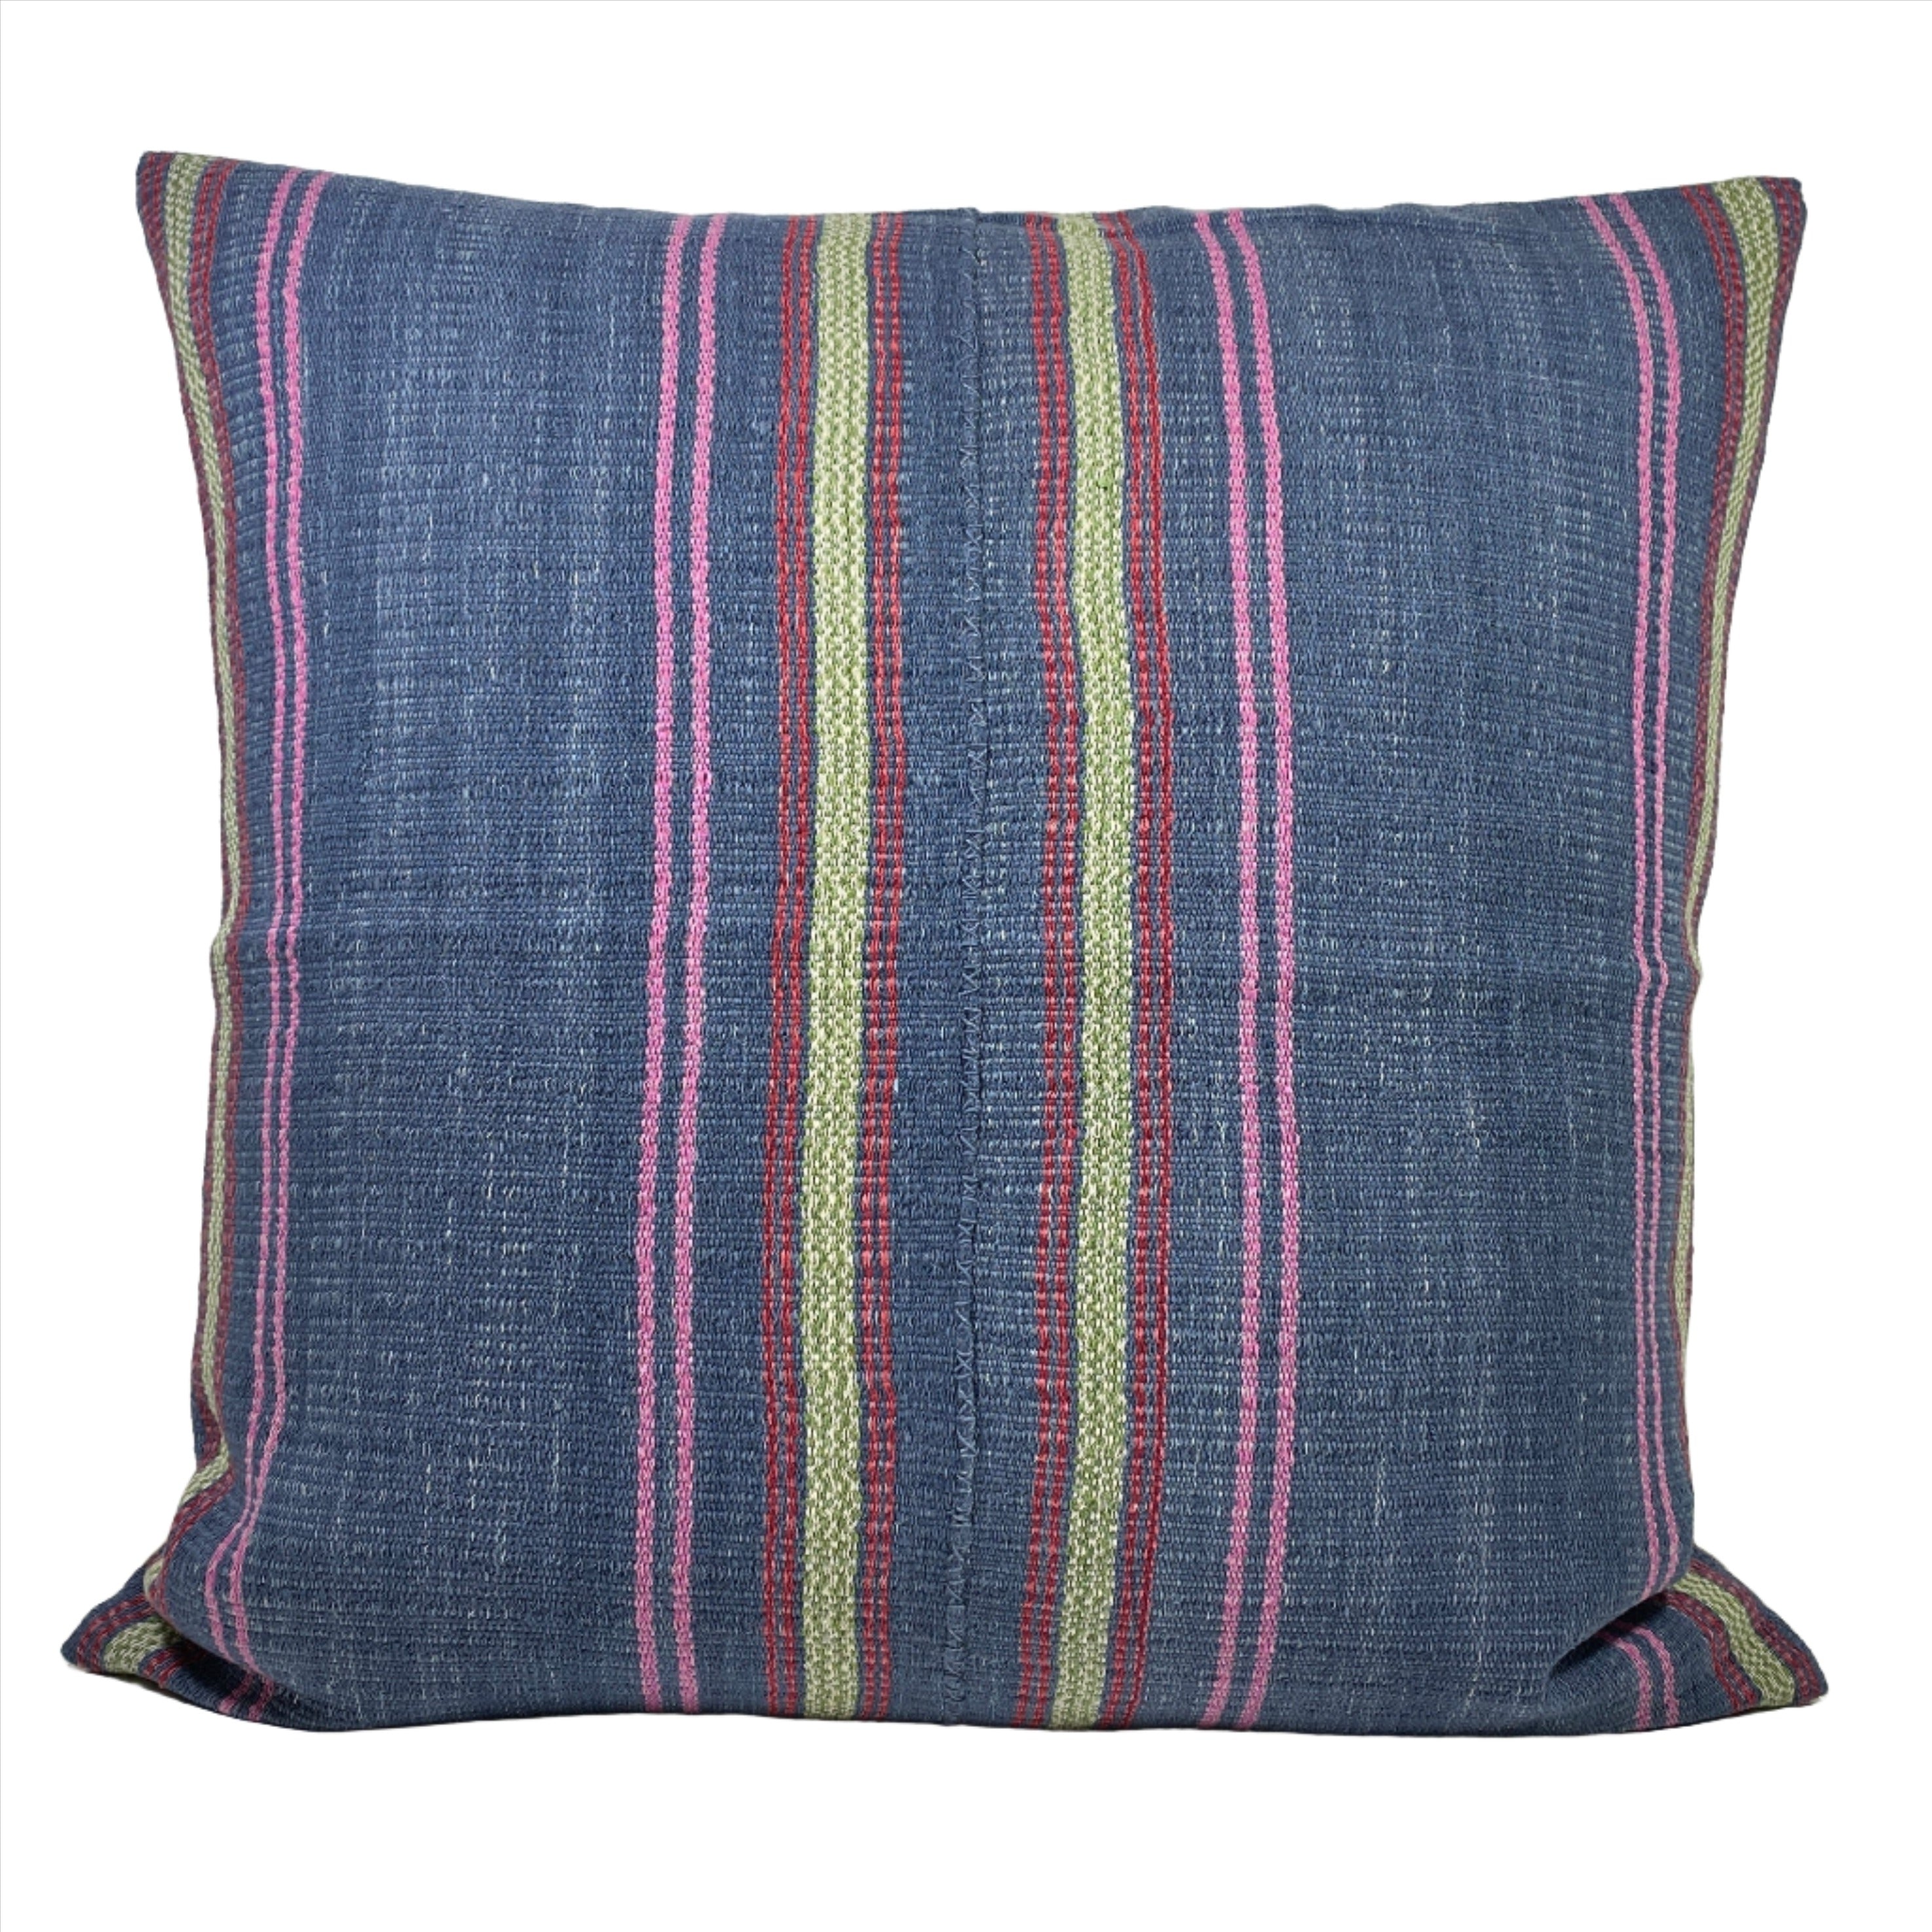 handwoven textile square pillow in blue, pink, red and green